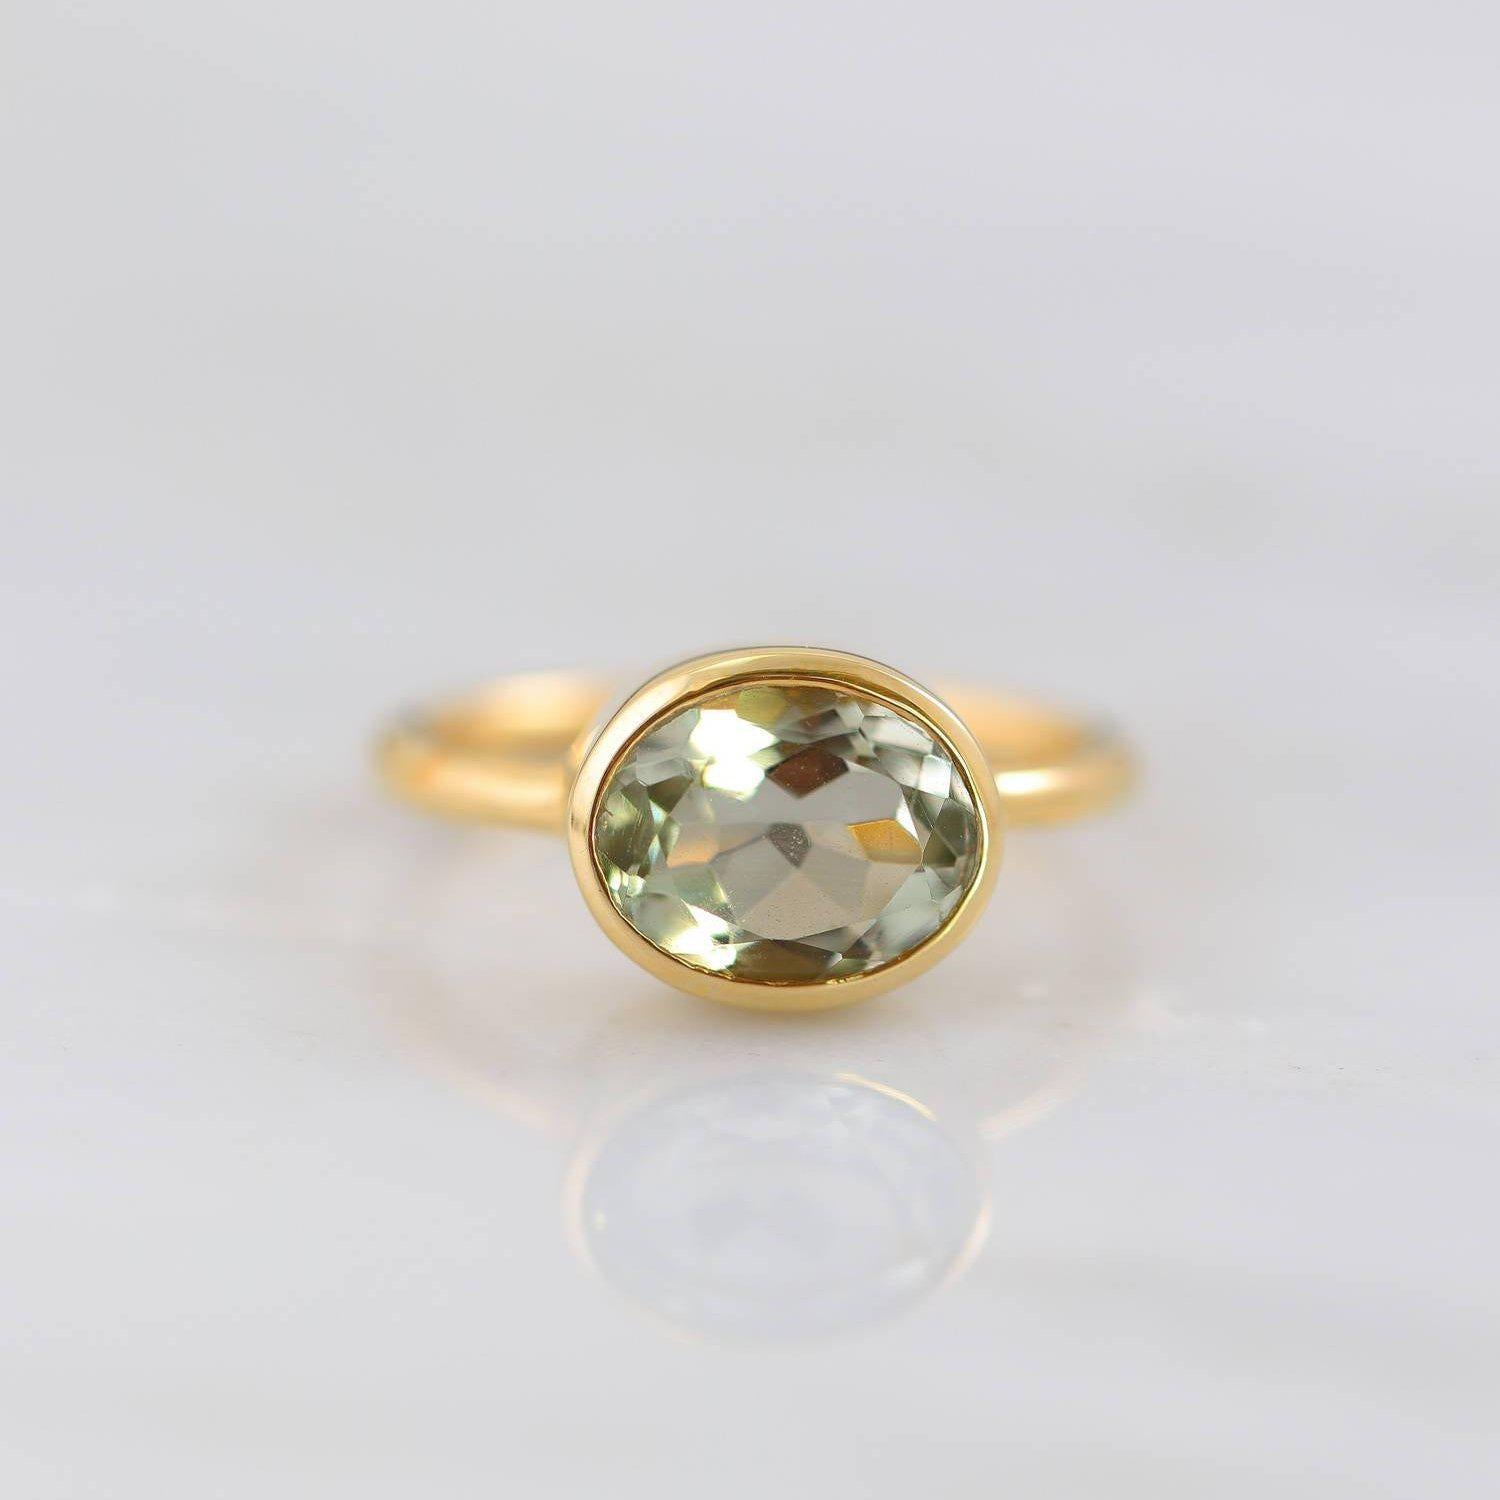 Green Amethyst Ring, Oval Ring, Bezel set ring, February Birthstone Ring, Gemstone Ring, Stacking Ring, Gold Ring, Bridal jewelry